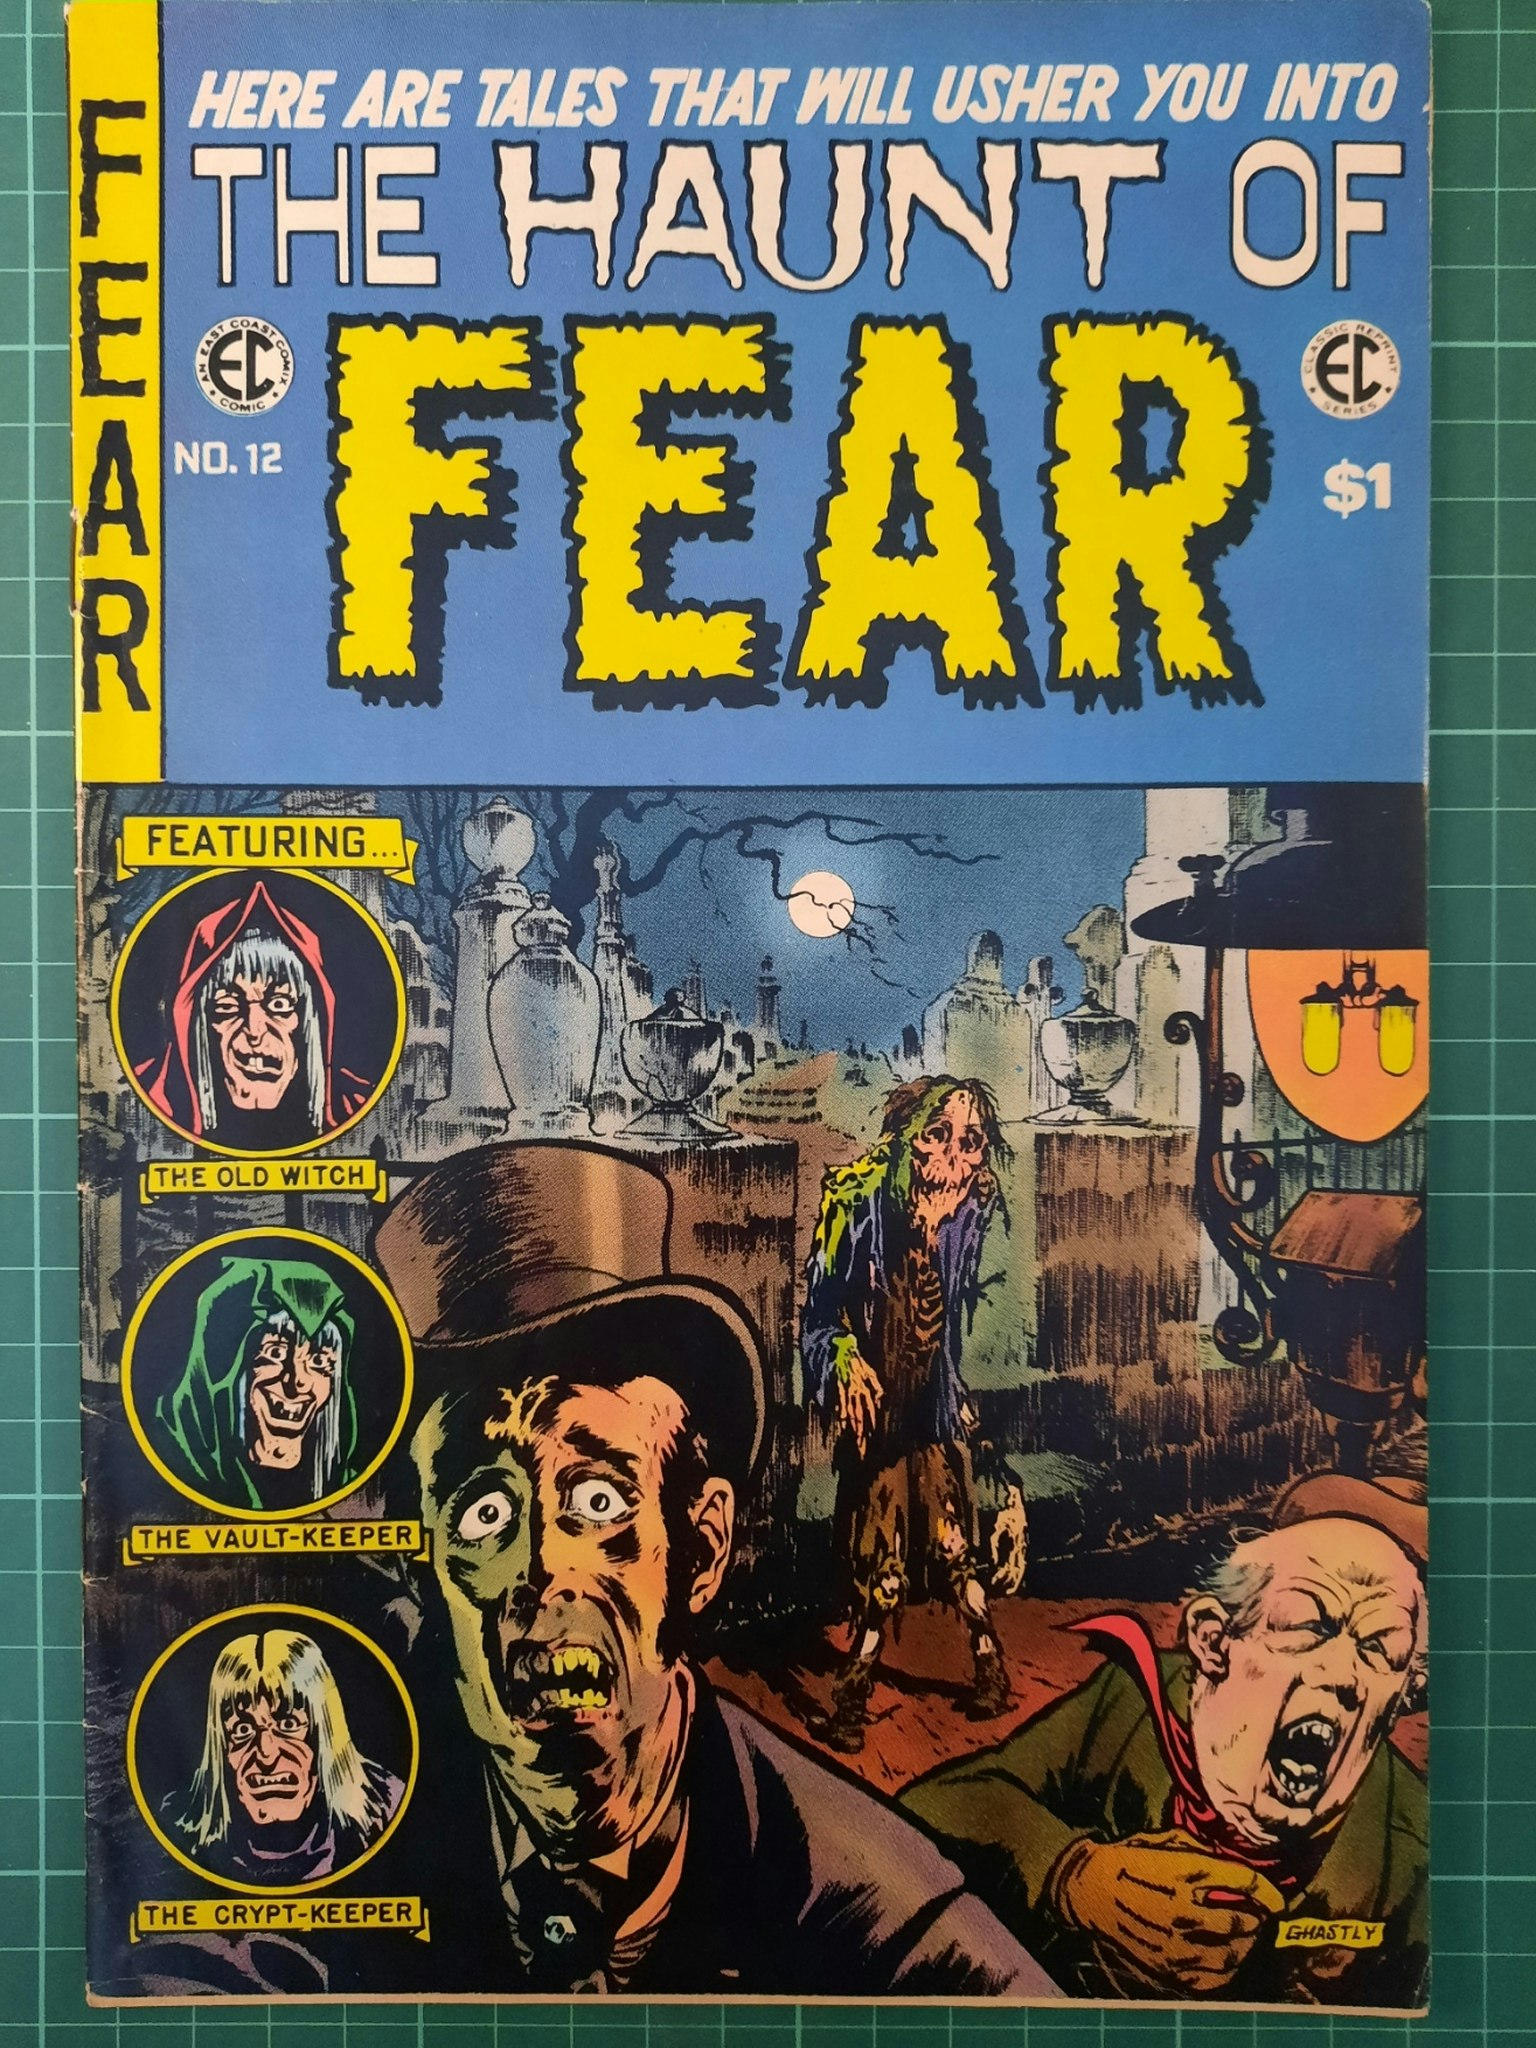 The haunt of fear #12